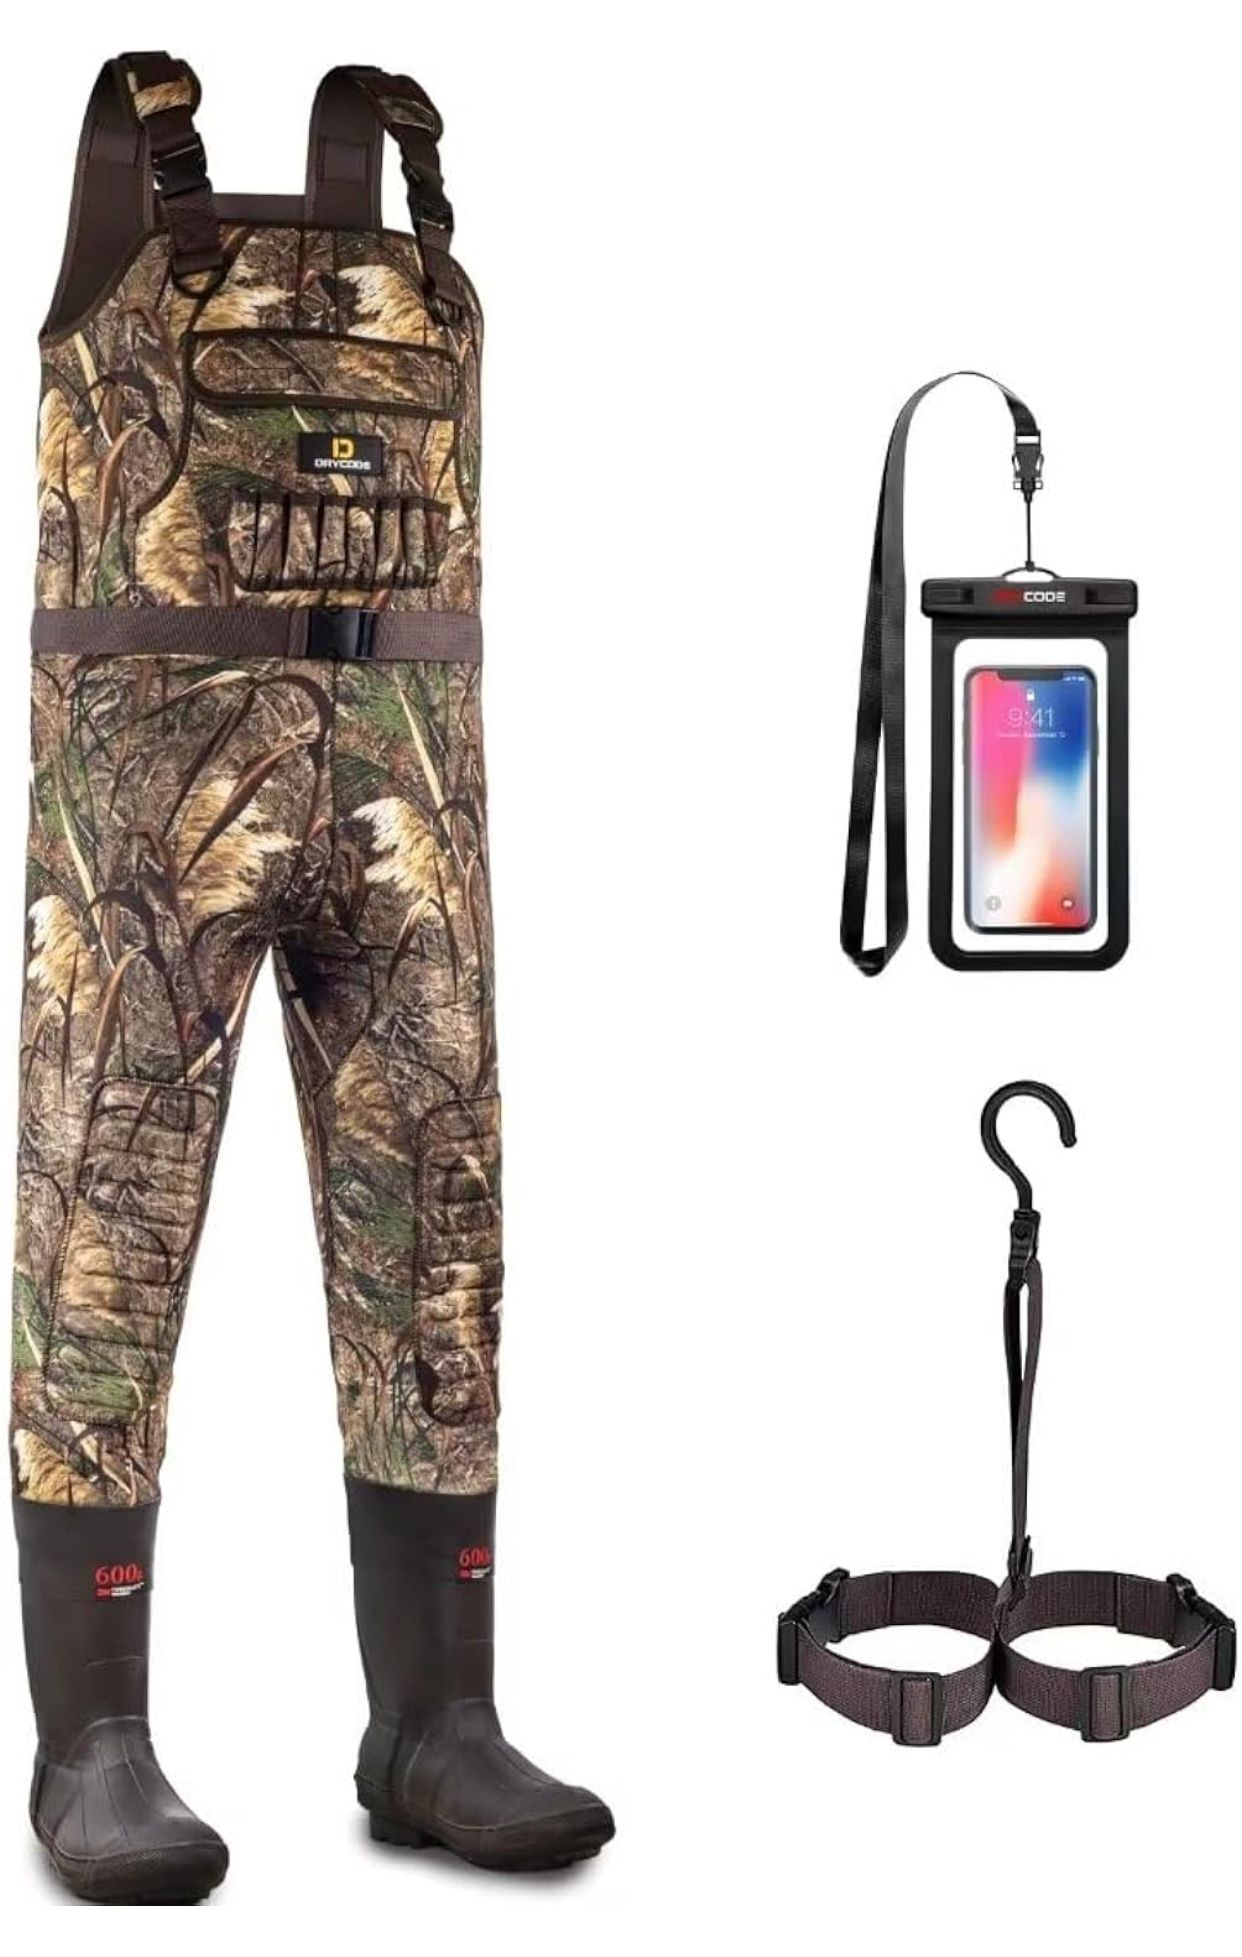 DRYCODE Chest Waders for Men, Neoprene Fishing Waders with 600G Boots, Waterproof Insulated Camo Duck Hunting Waders